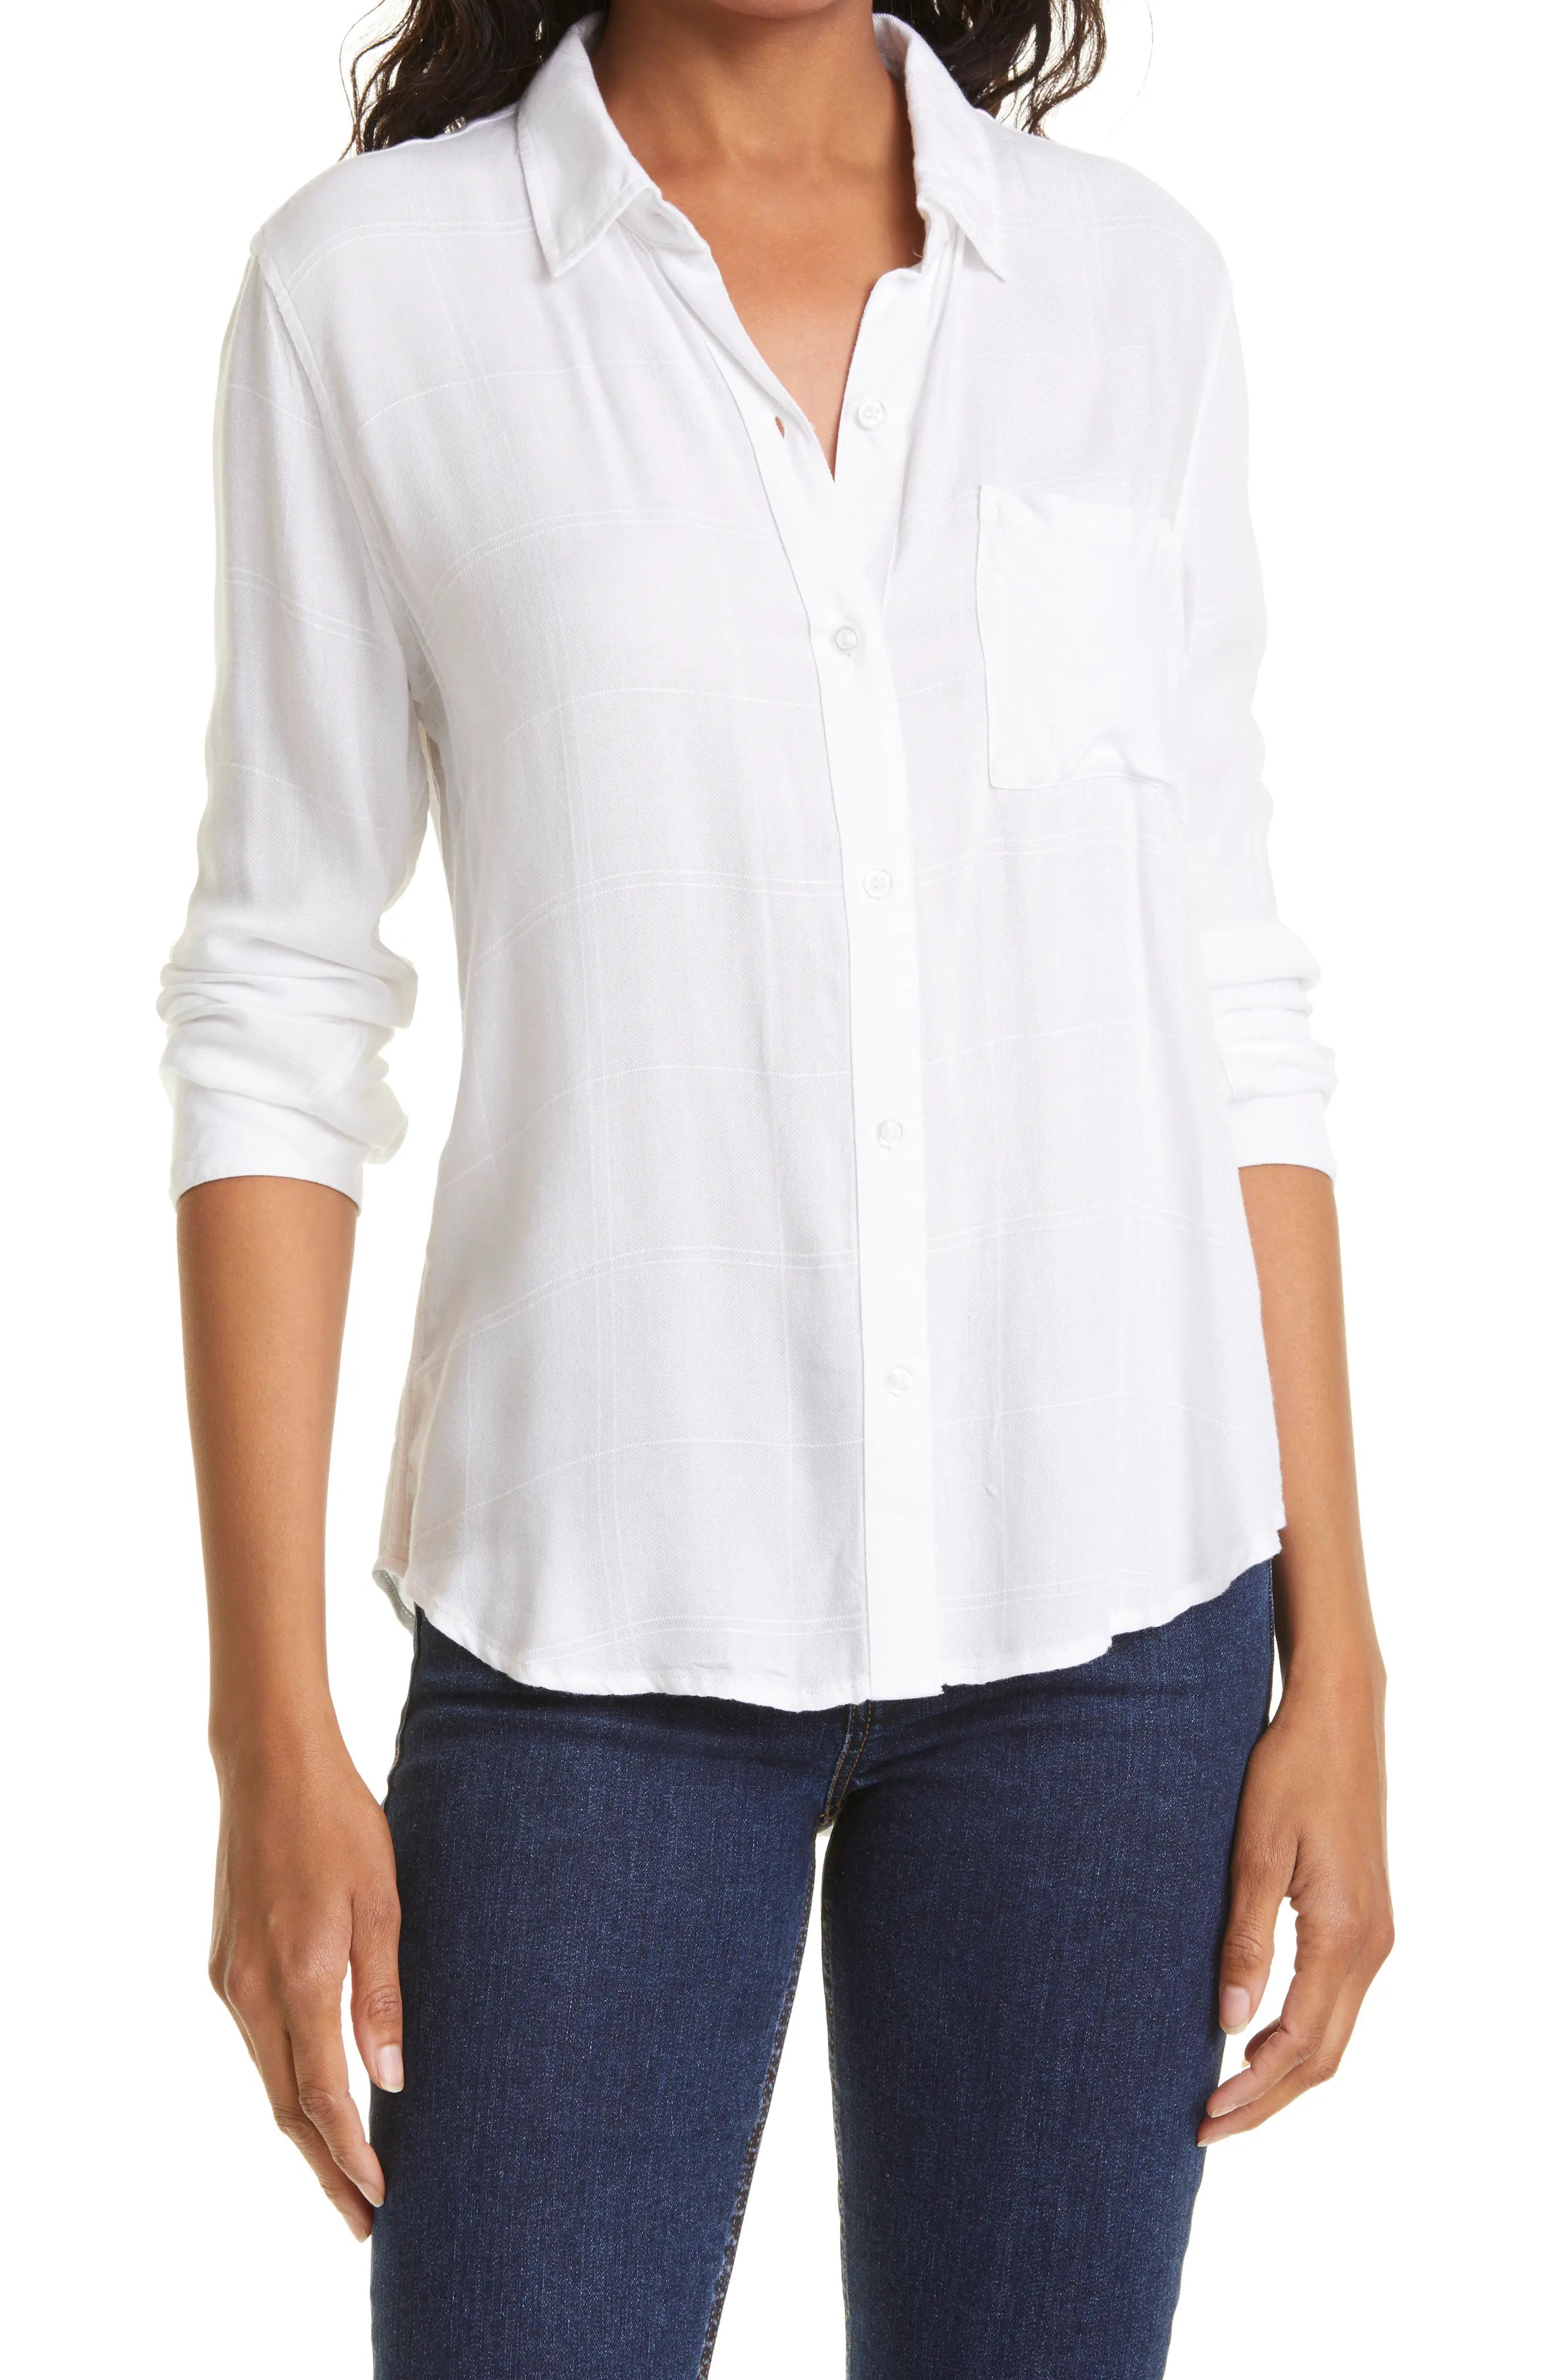 Rails Hunter Button-Up Shirt in Ivory Check at Nordstrom, Size Medium | Nordstrom